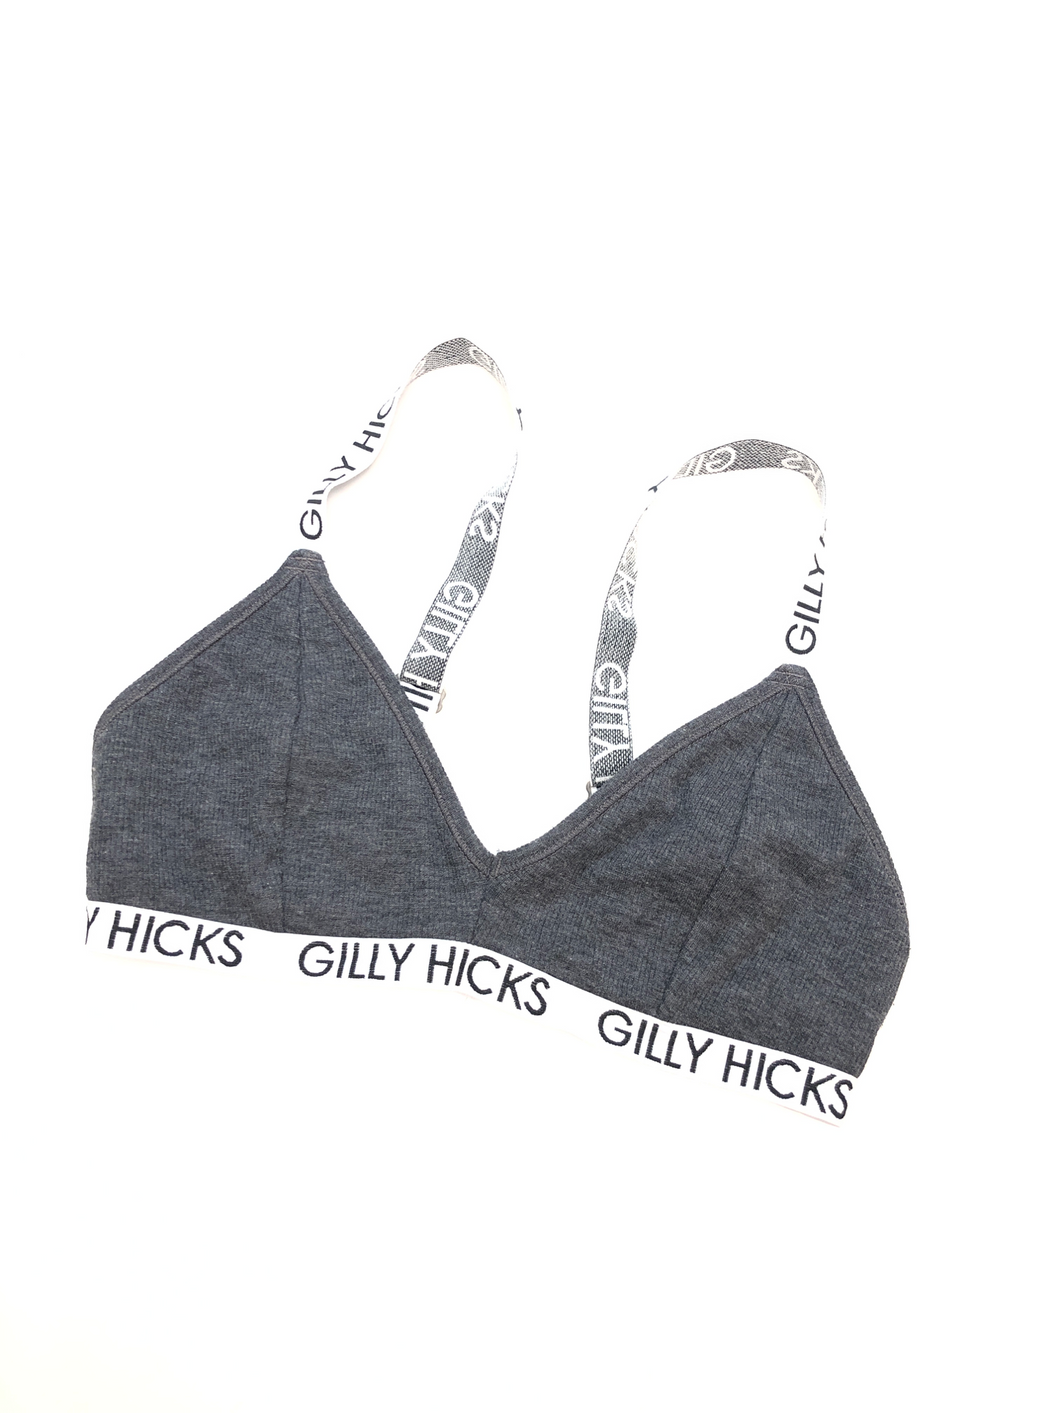 Gilley Hicks Tank Top Size Small